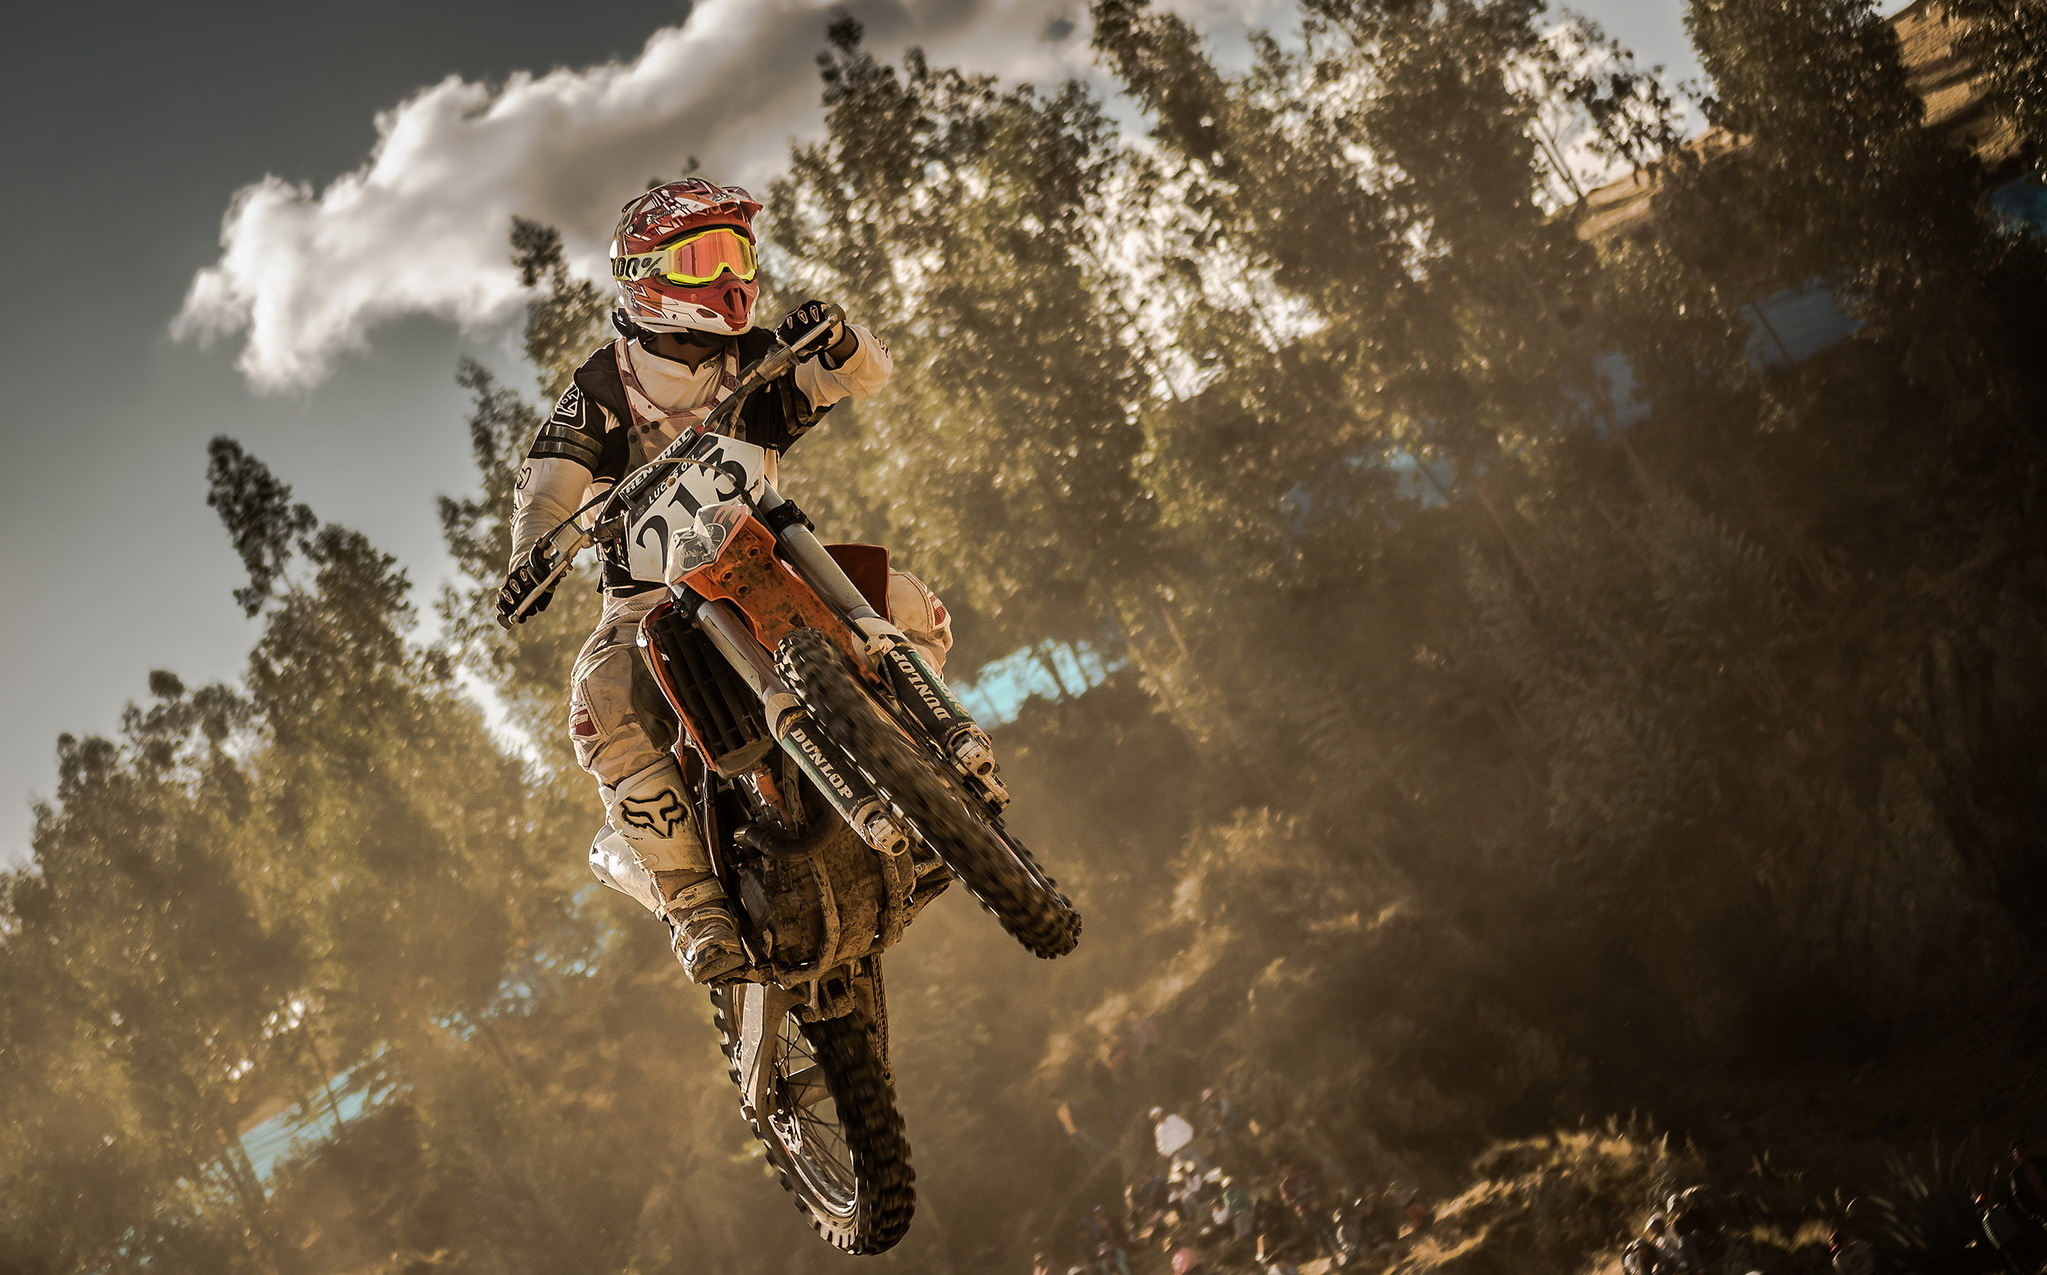 Enduro Motorbike: FIM Motocross World Championship, Jumping In The Air With A Bike, Off-Road Circuits, Cross-Country Race. 2050x1280 HD Background.